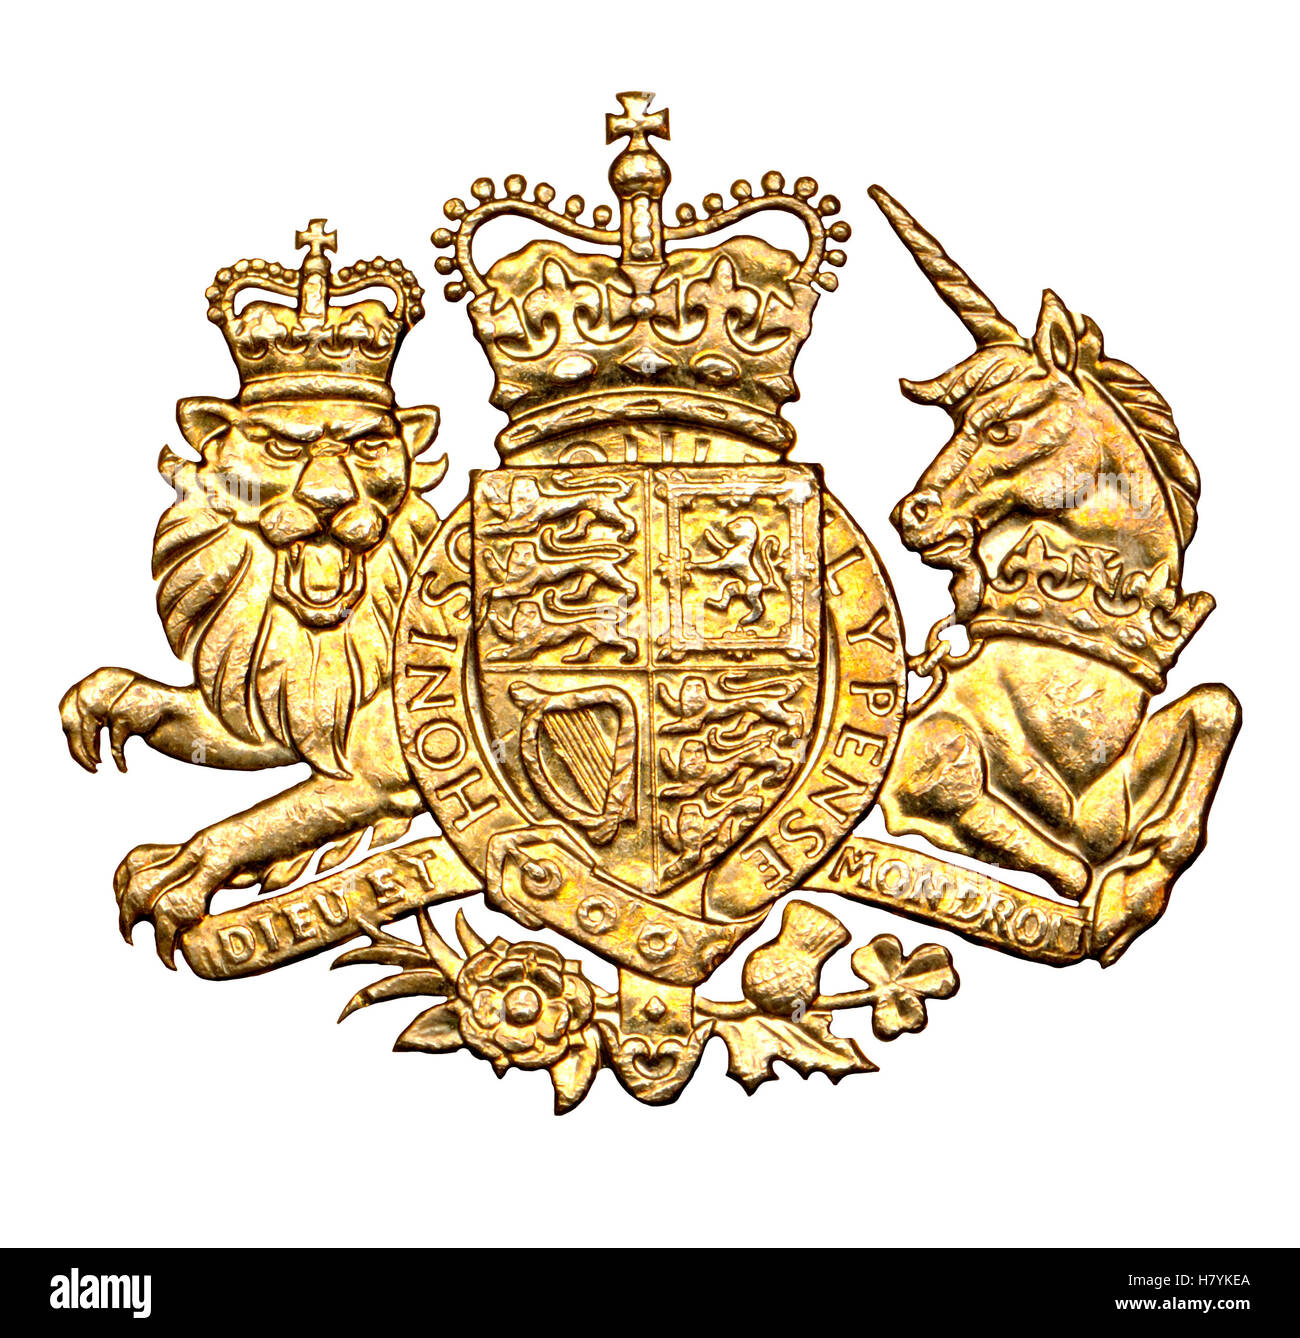 United Kingdom coat of arms, cut-out from a British £1 coin Stock Photo